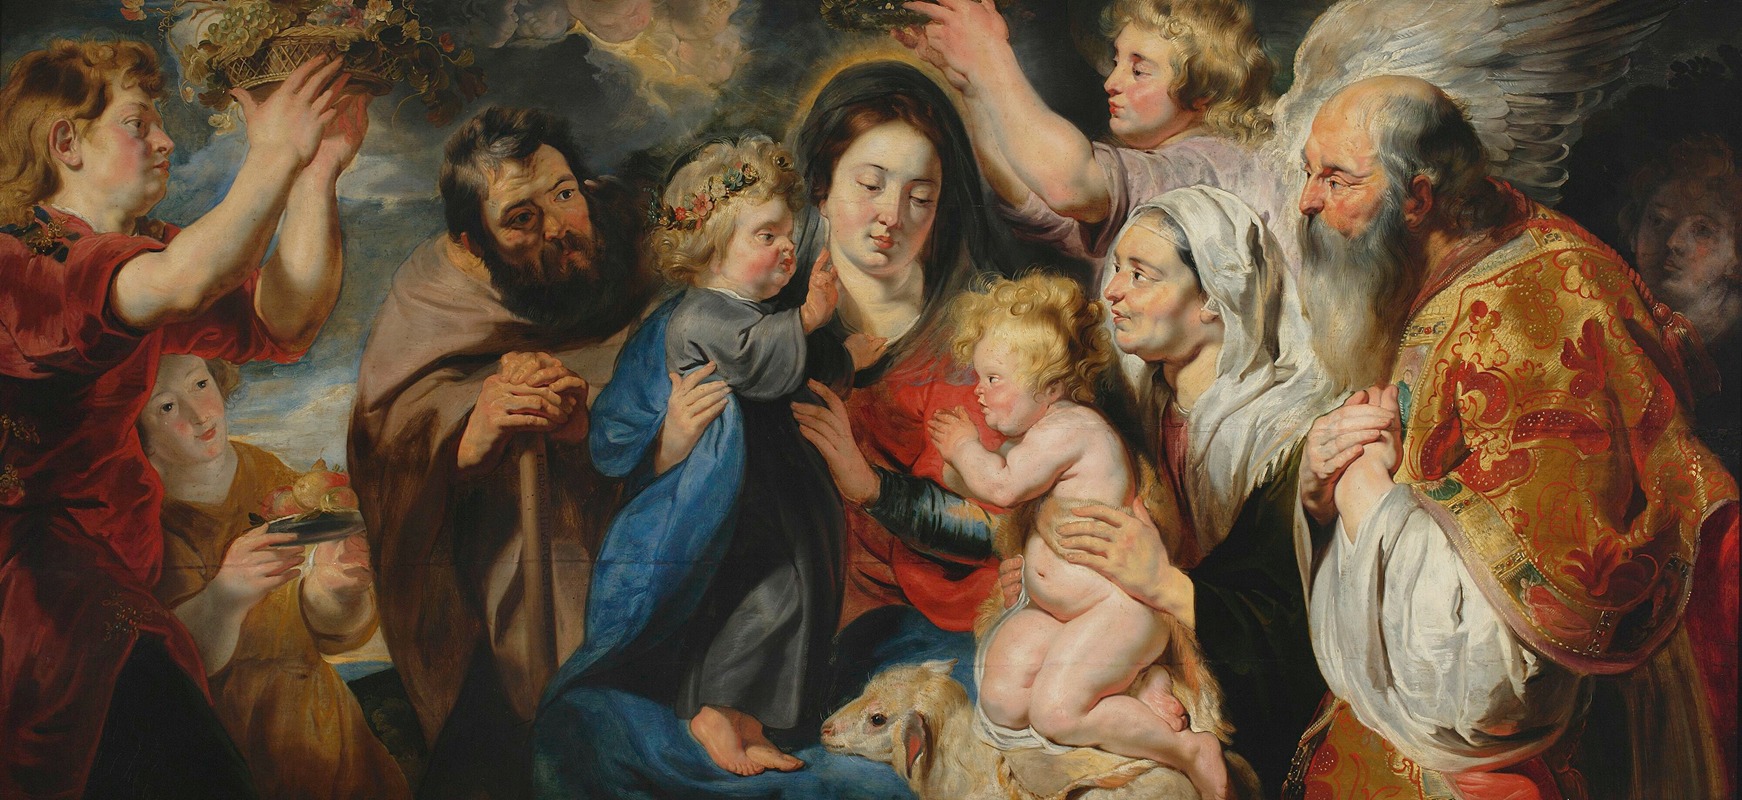 Jacob Jordaens - Holy Family surrounded by angels